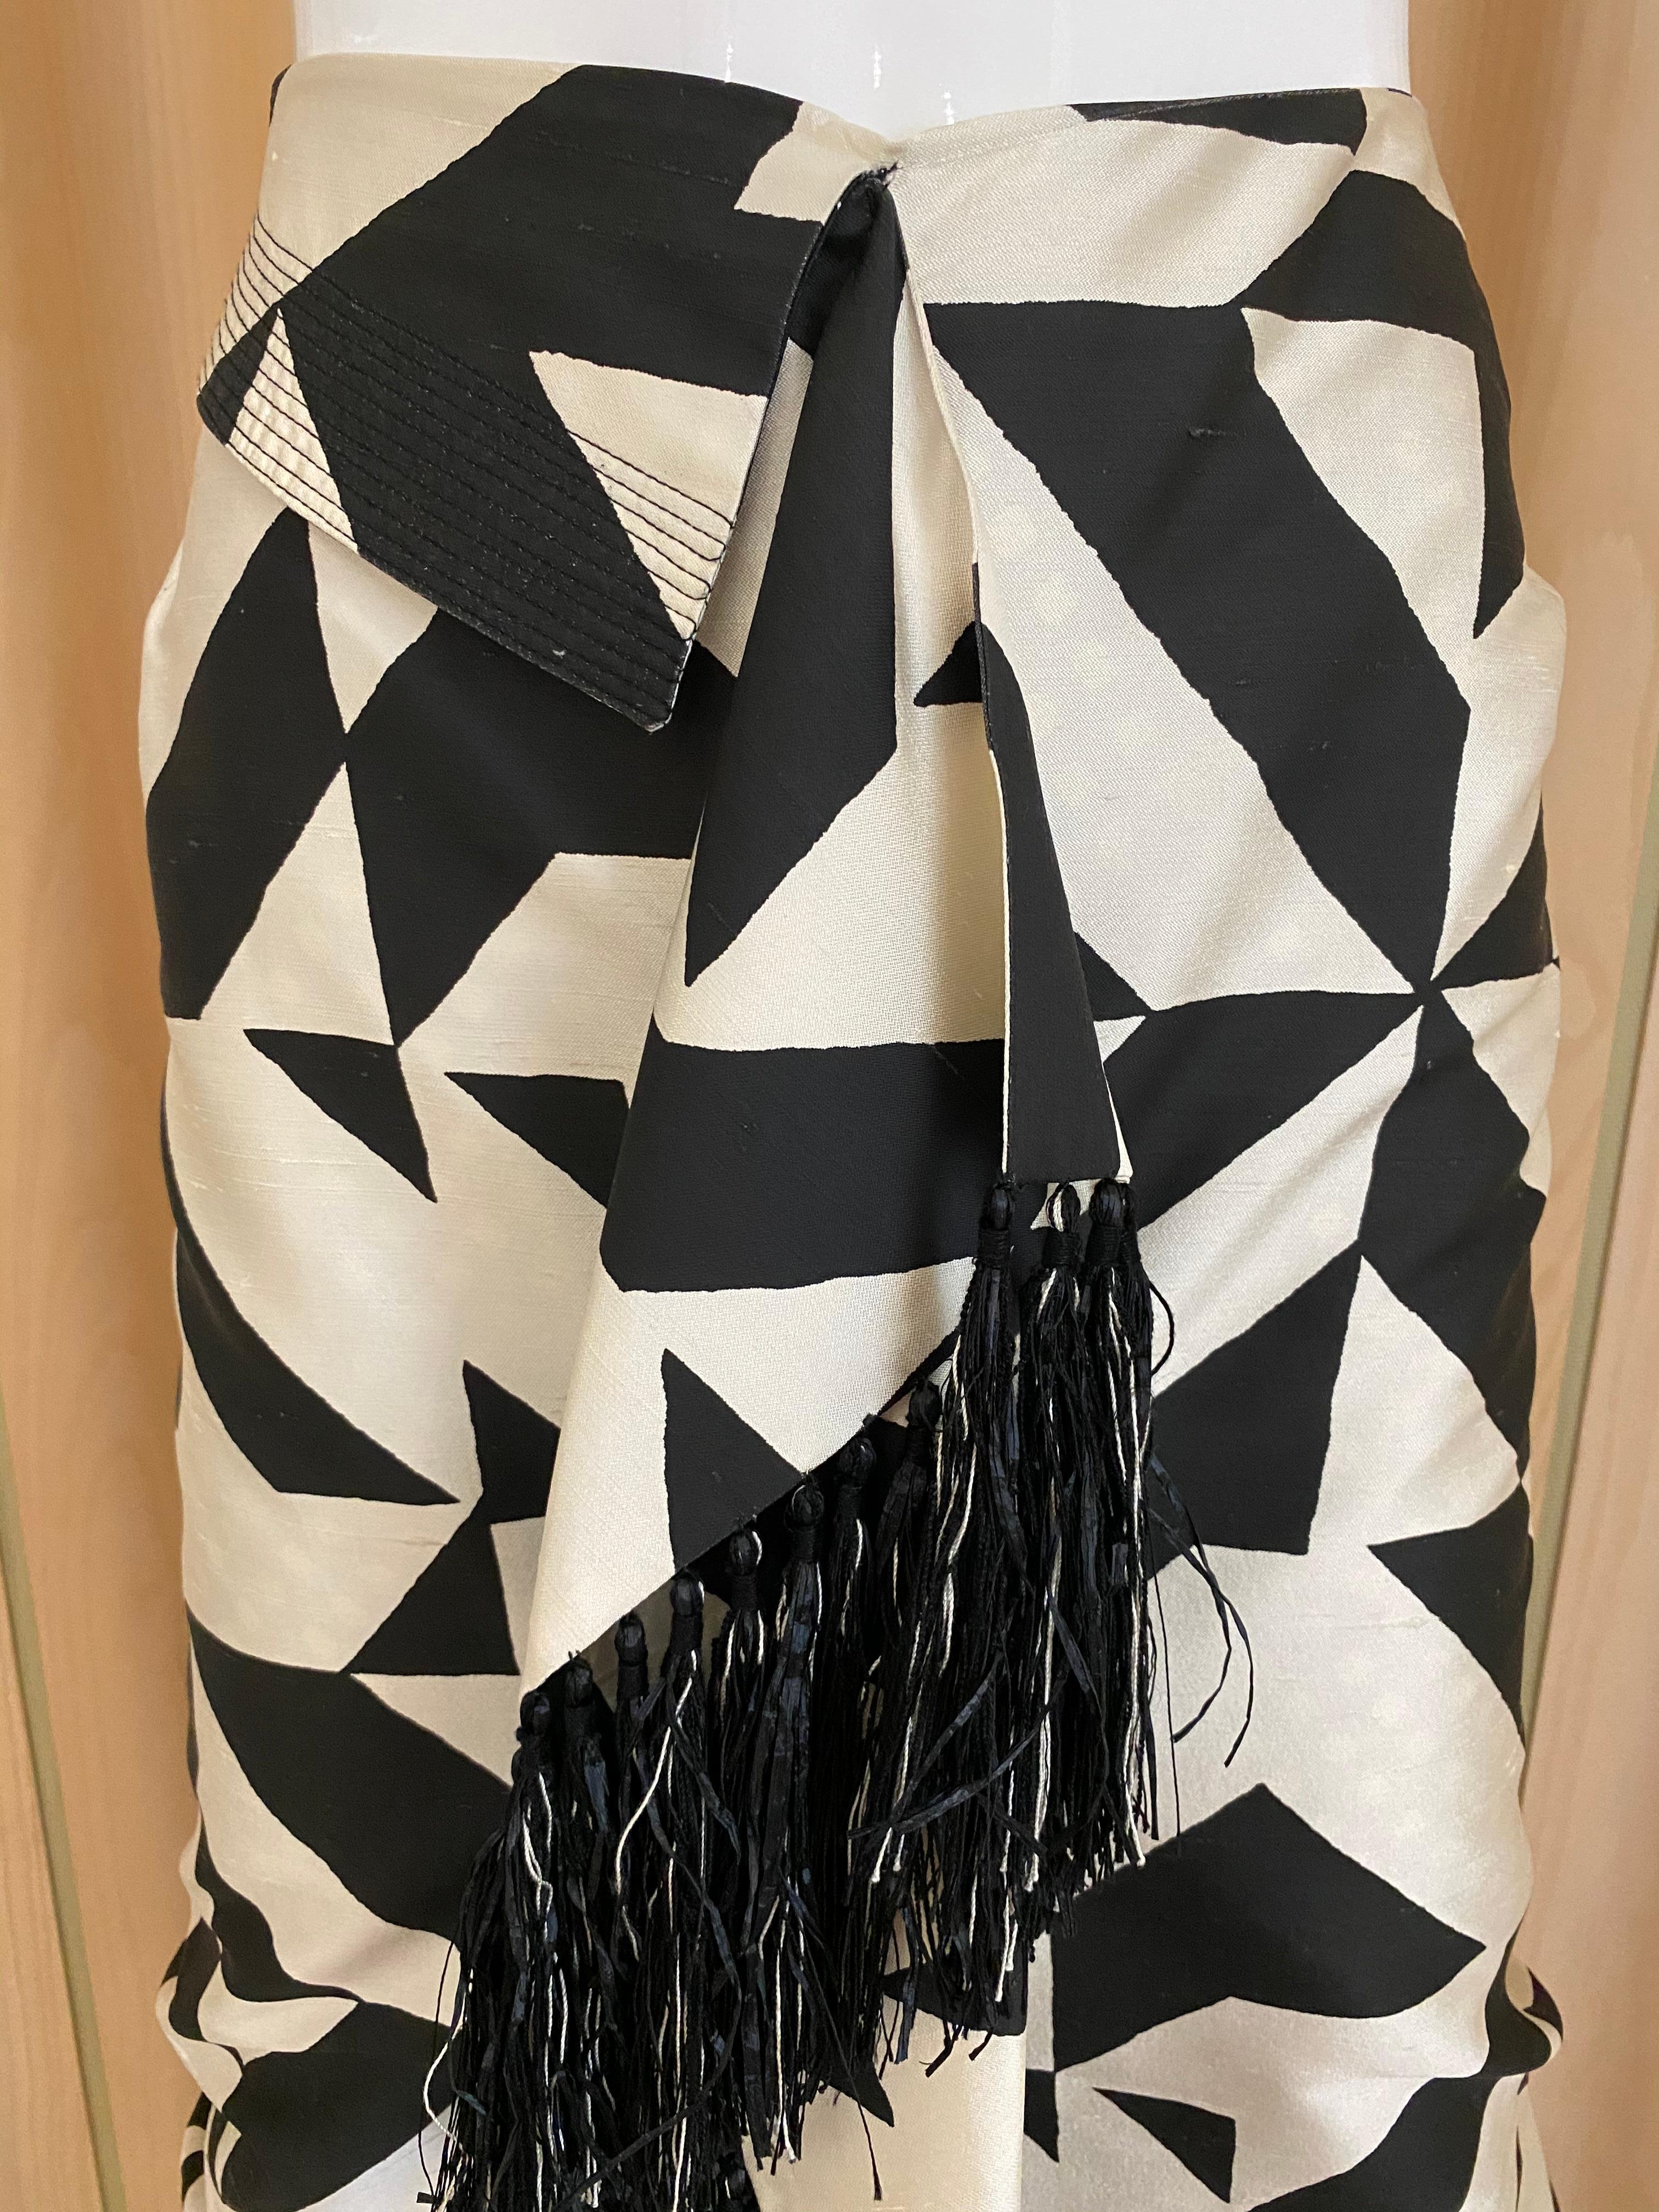 Vintage Gianfranco Ferre black and white graphic print Silk Skirt with fringe from the waist to hem. Skirt is lined in polkadot silk pattern. zip at the back. Skirt is in excellent condition.
Size : medium/ large 
Measurement : 
Waist : 32” / Hip: